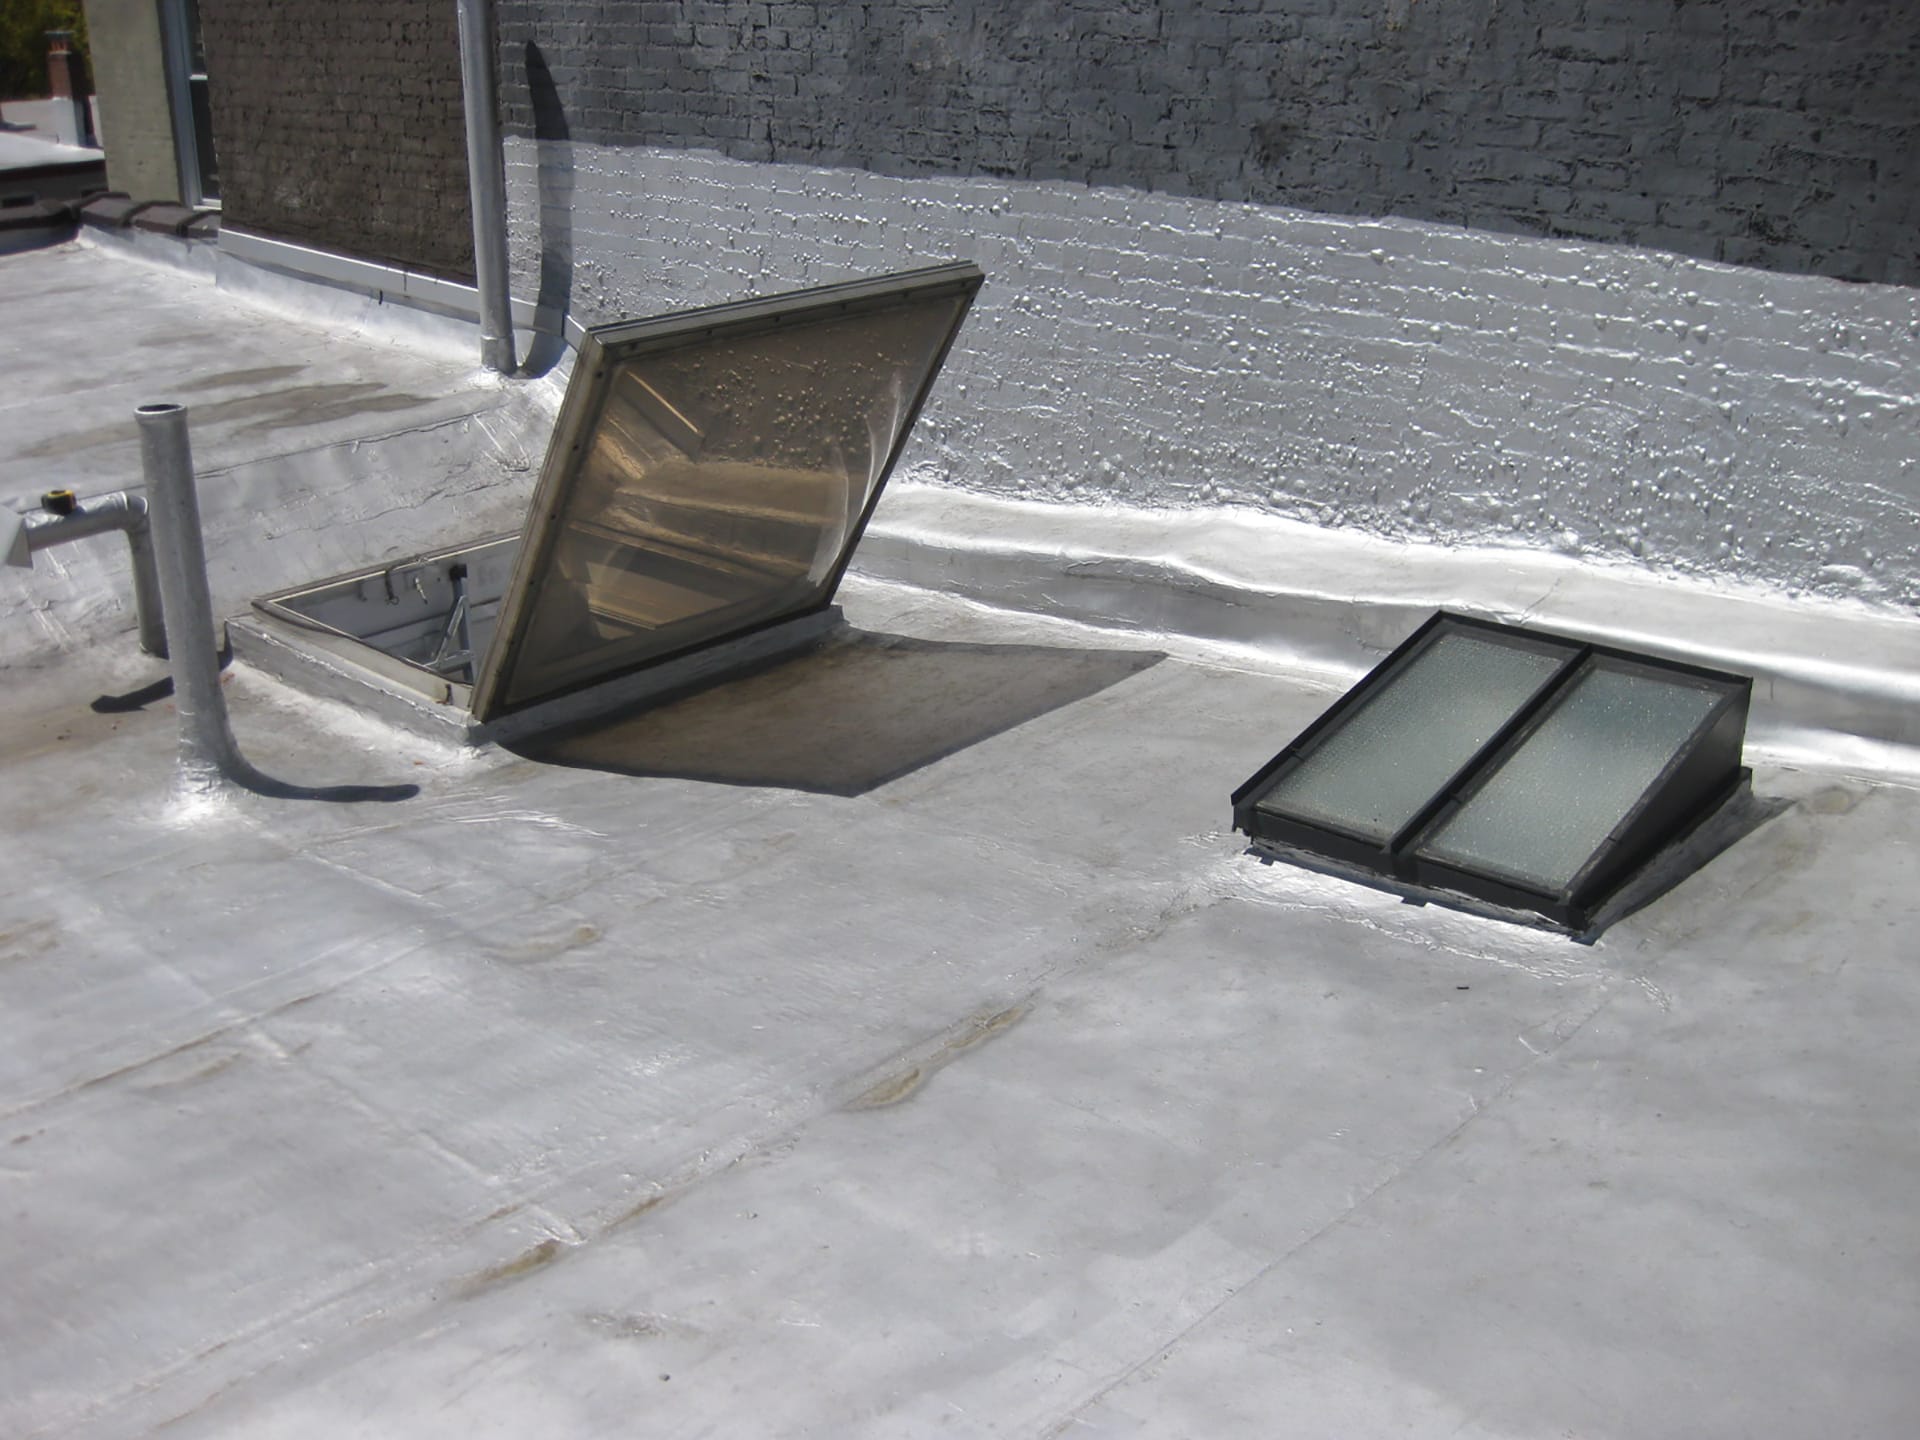 Carroll Gardens rooftop with a hatch leading to the attic, a skylight, and shiny reflective surface covering the roof.